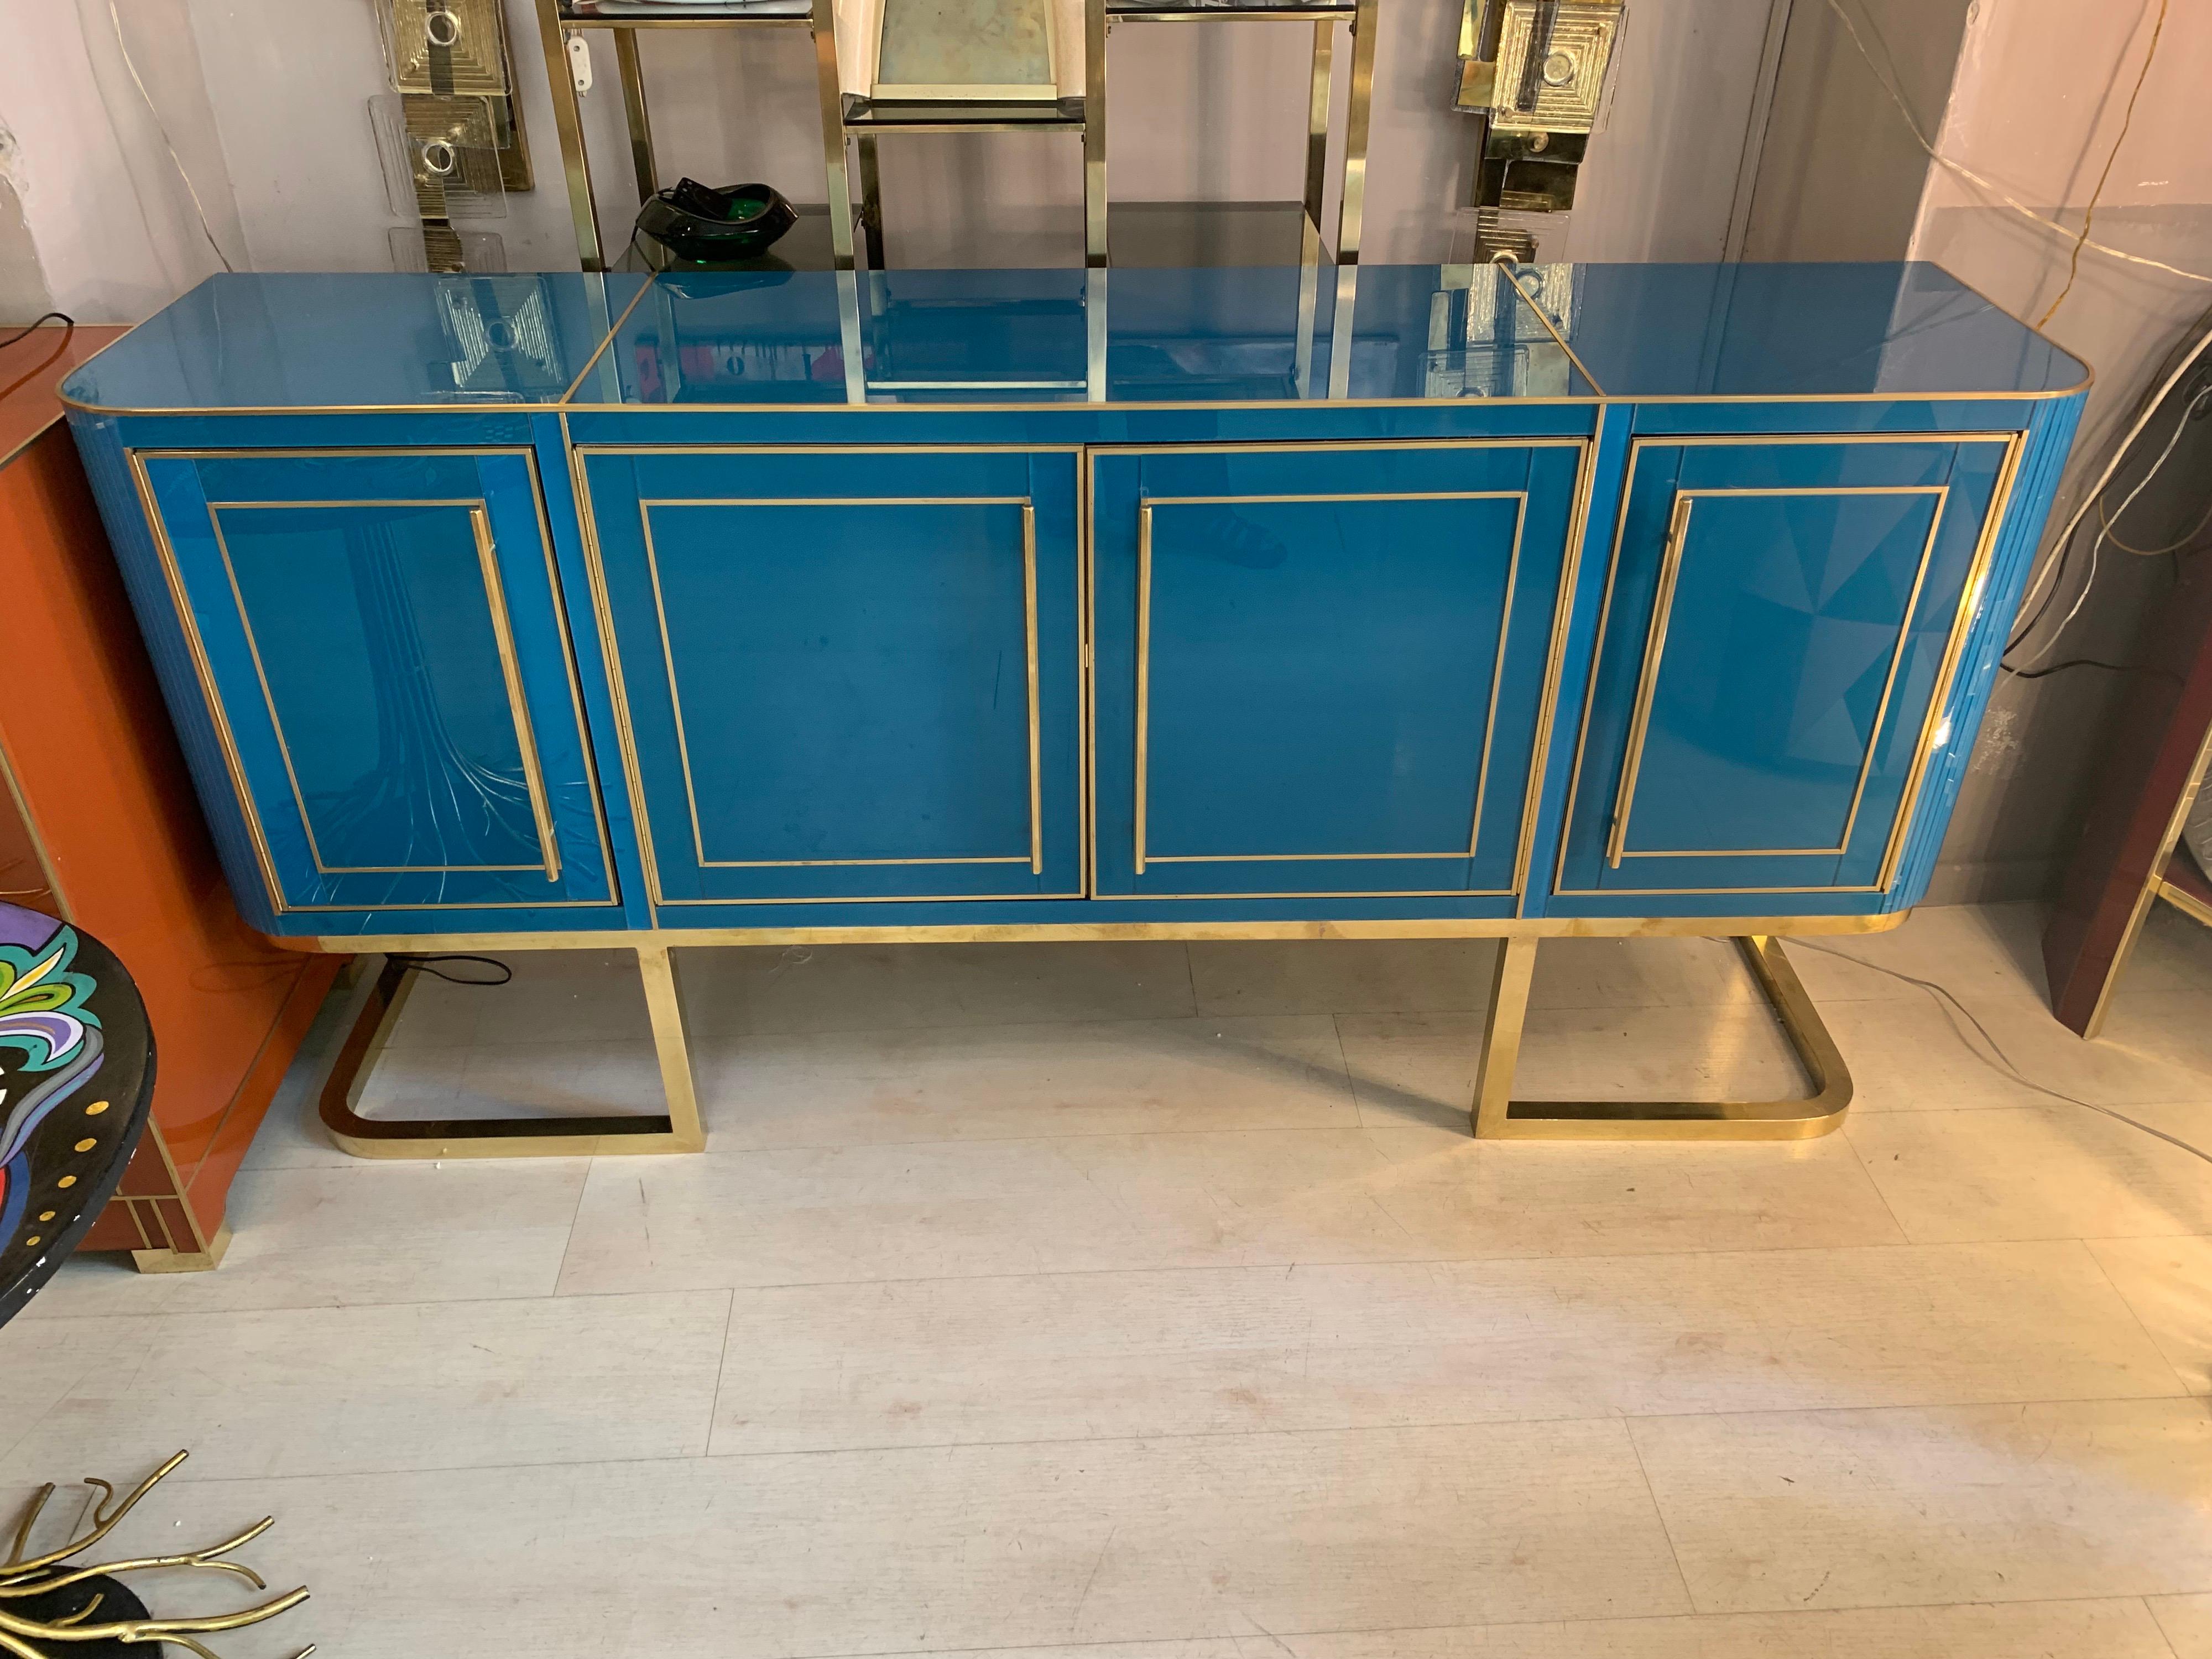 Italian turquoise opaline glass credenza with inlays, brass handles and legs.
The chest has four doors with shelves inside.